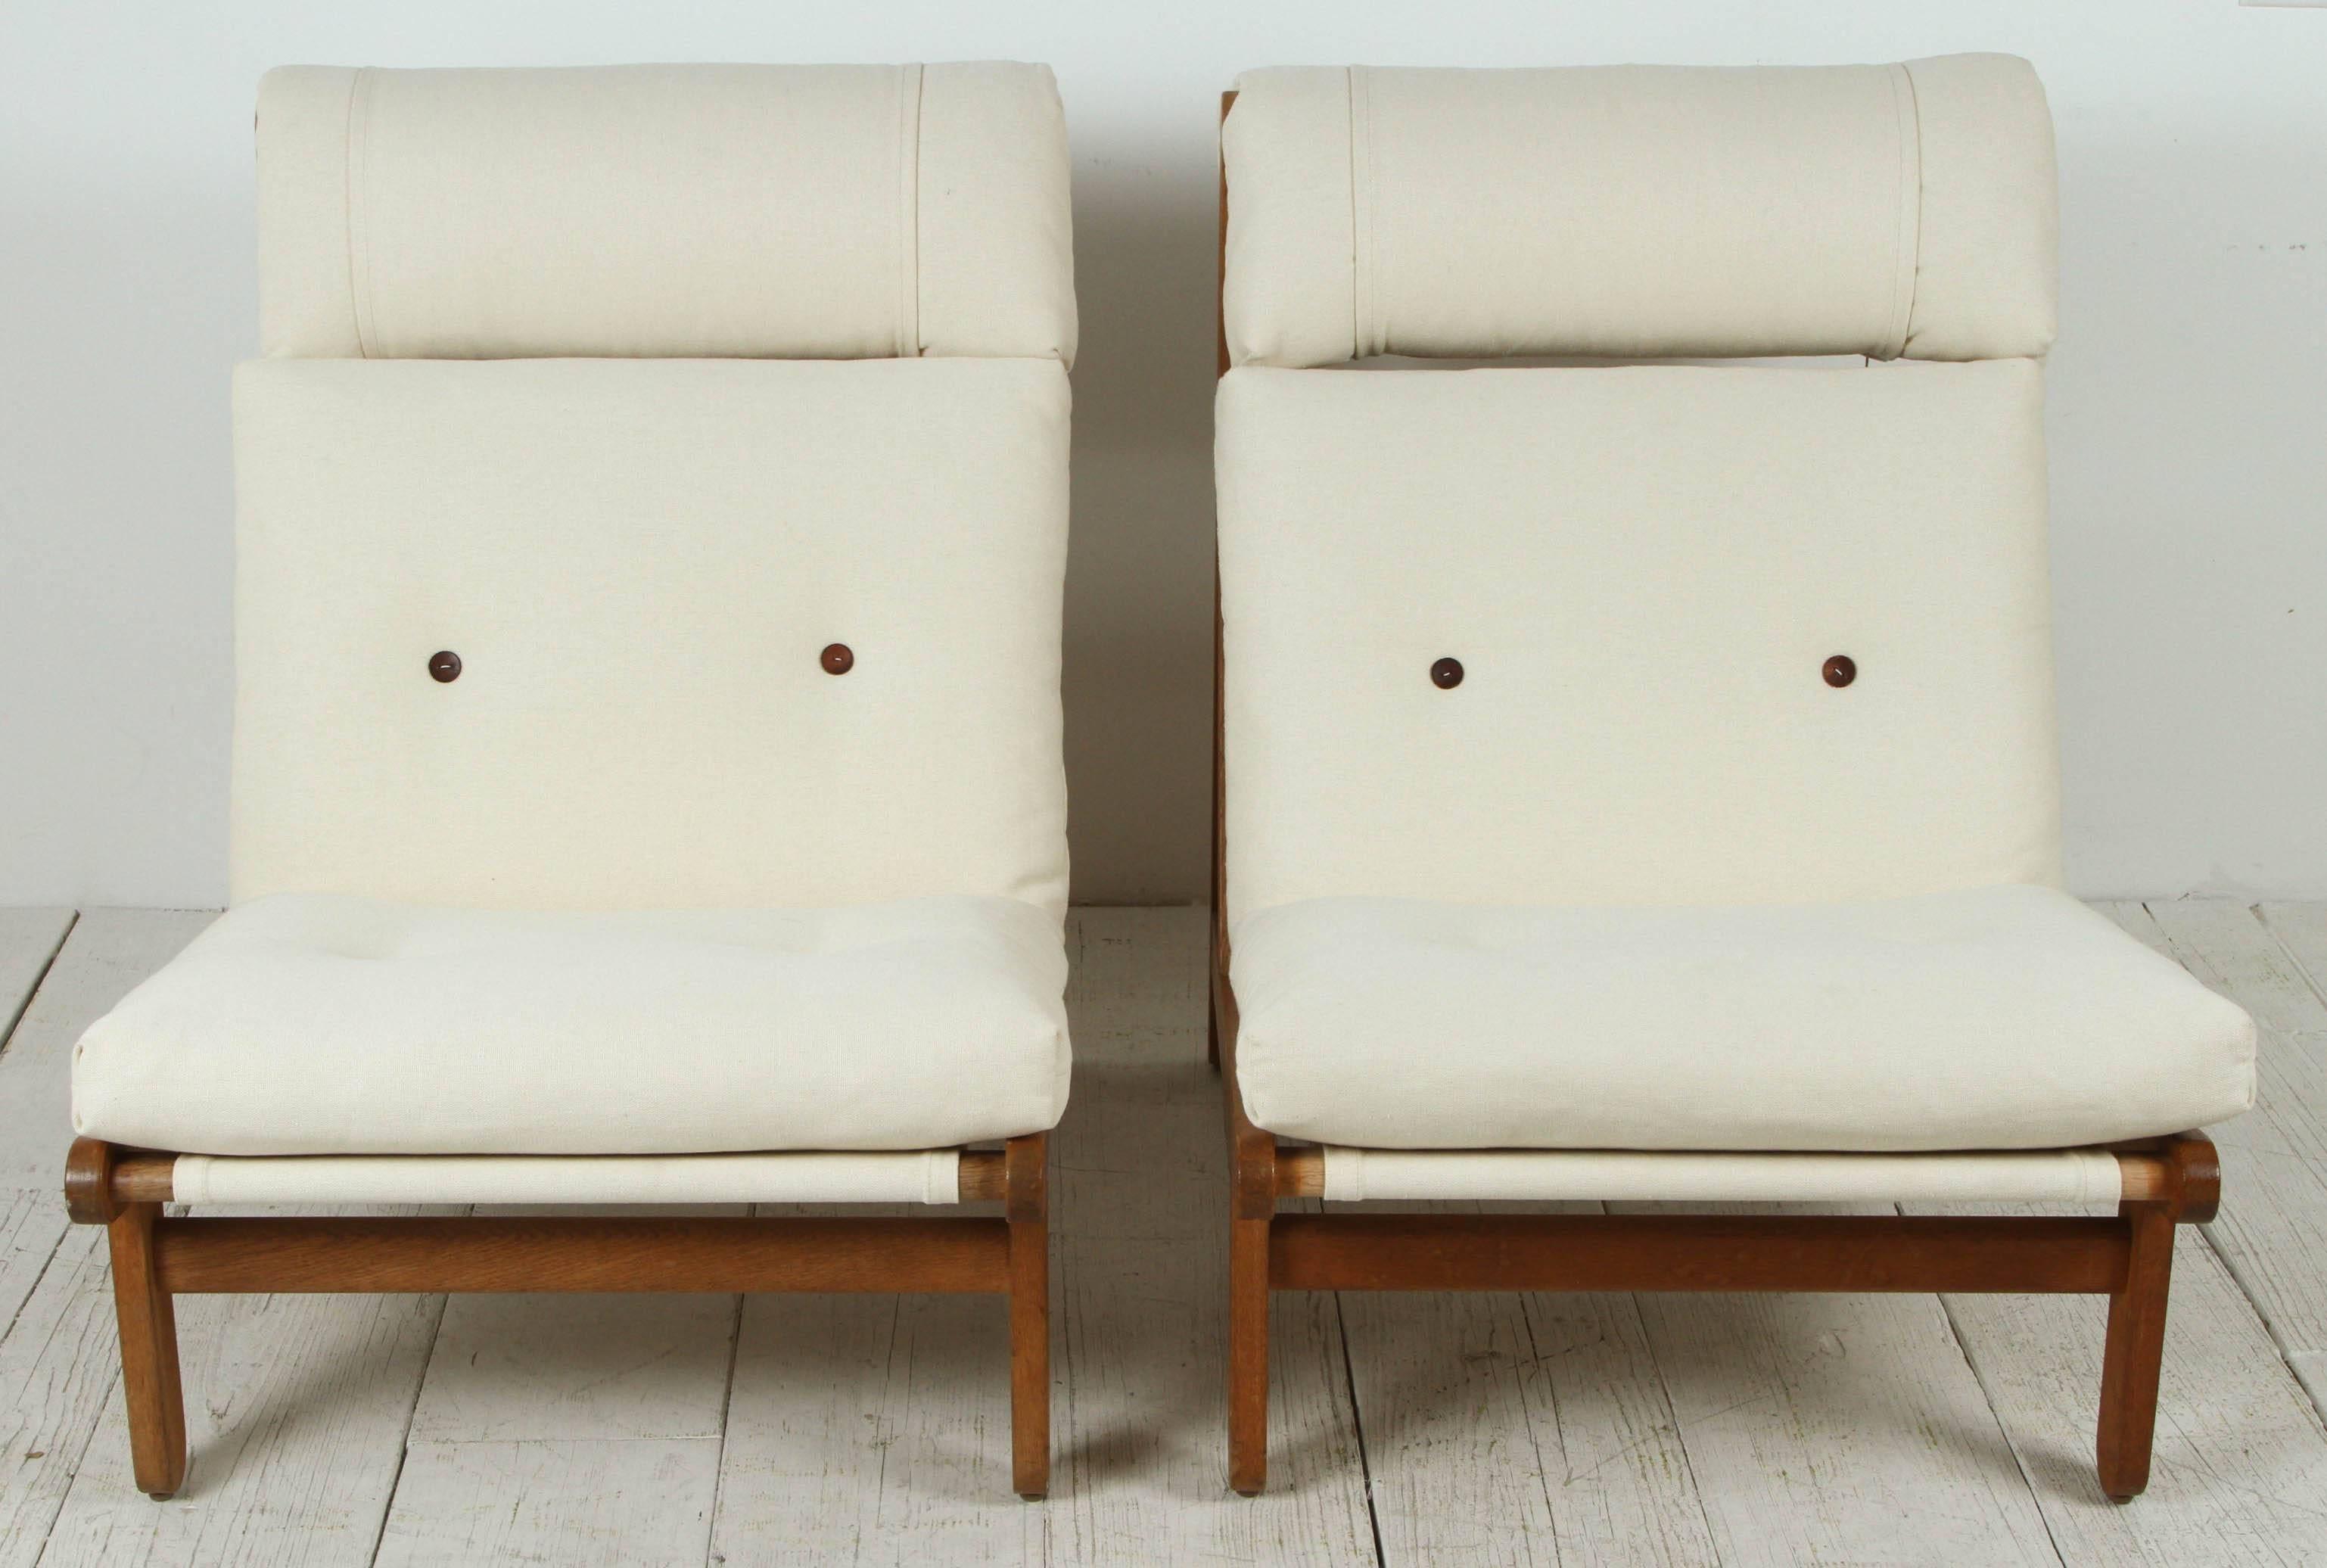 Classic Bernt Petersen lounge chairs, newly upholstered in hemp linen with leather buttons. Sold as a pair.